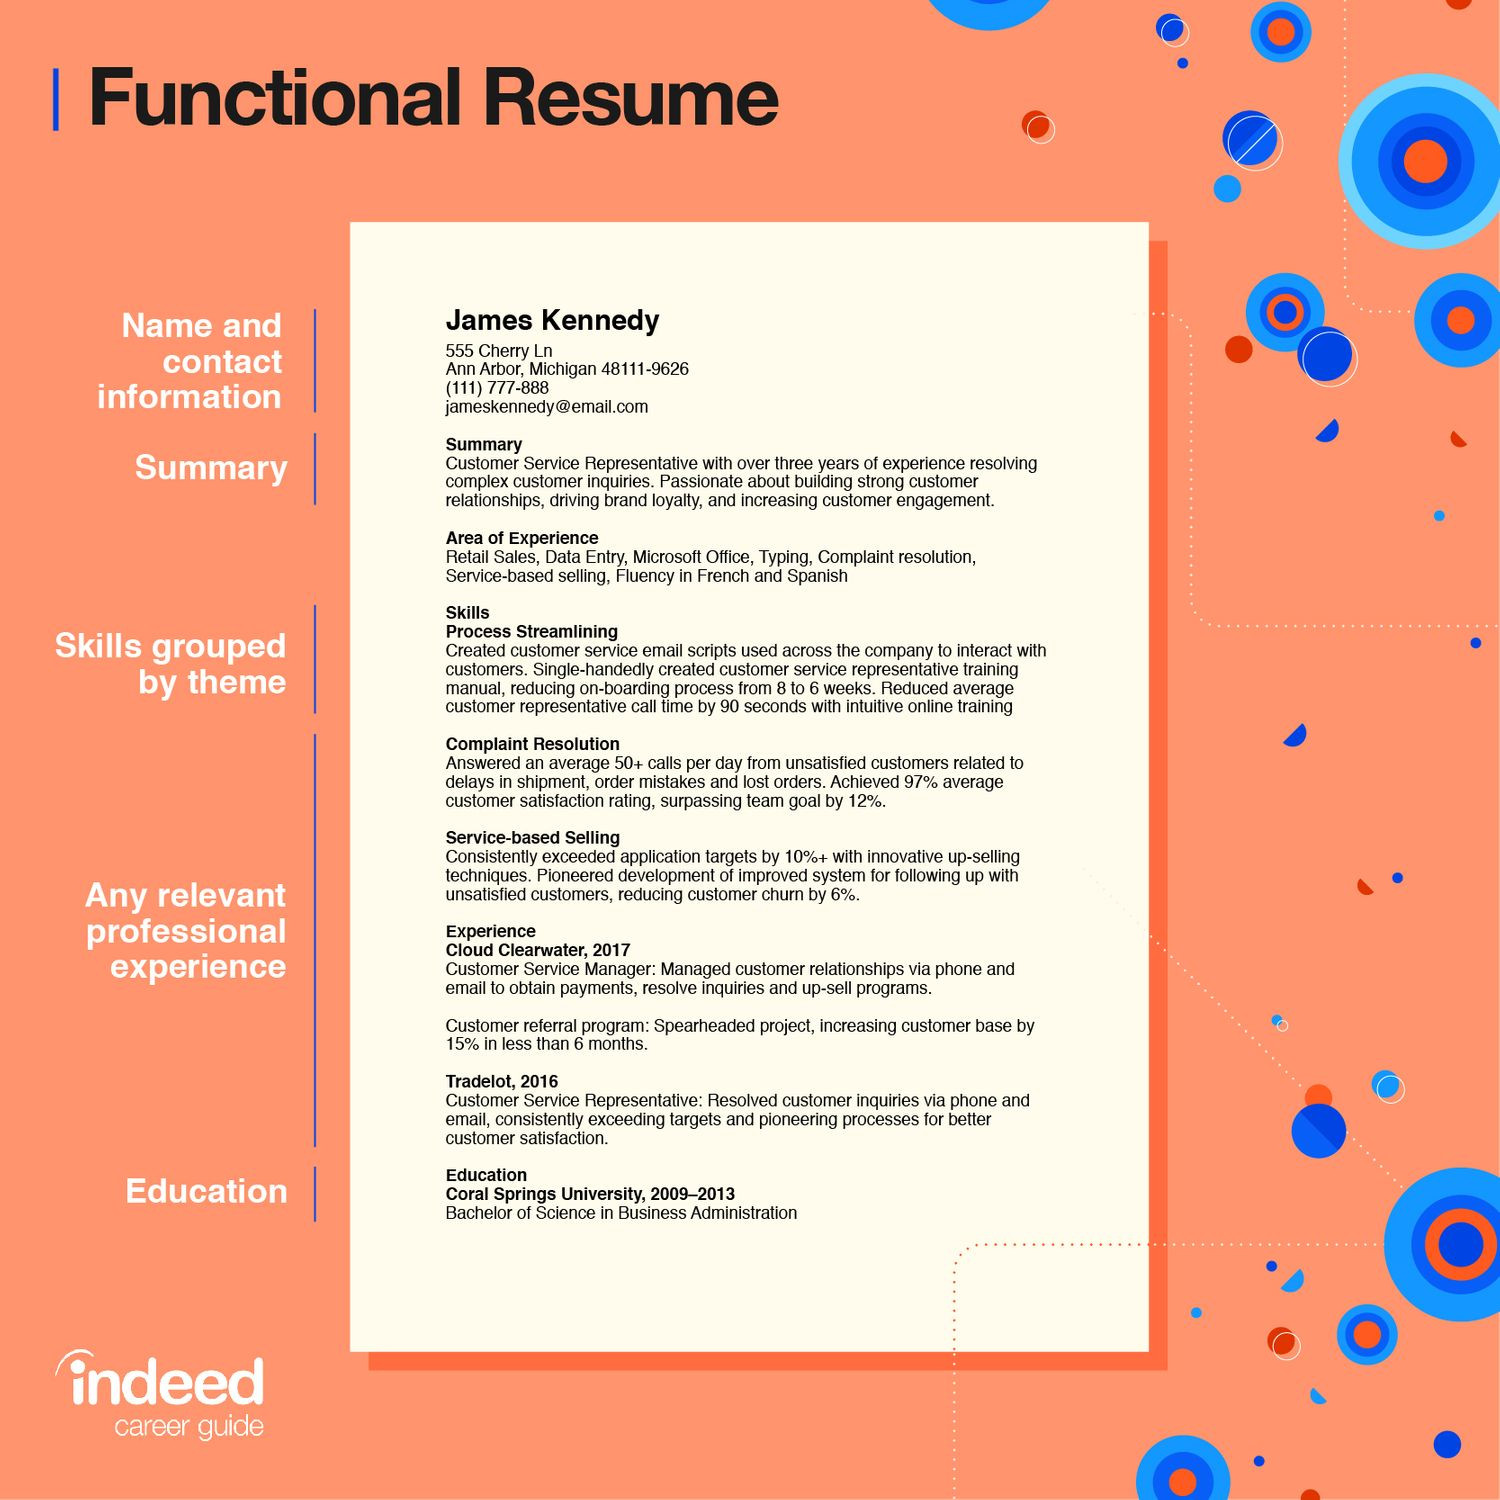 Free Sample Of Sales Representative Resume On Indeed top Resume formats: Tips and Examples Of 3 Common Resumes Indeed.com